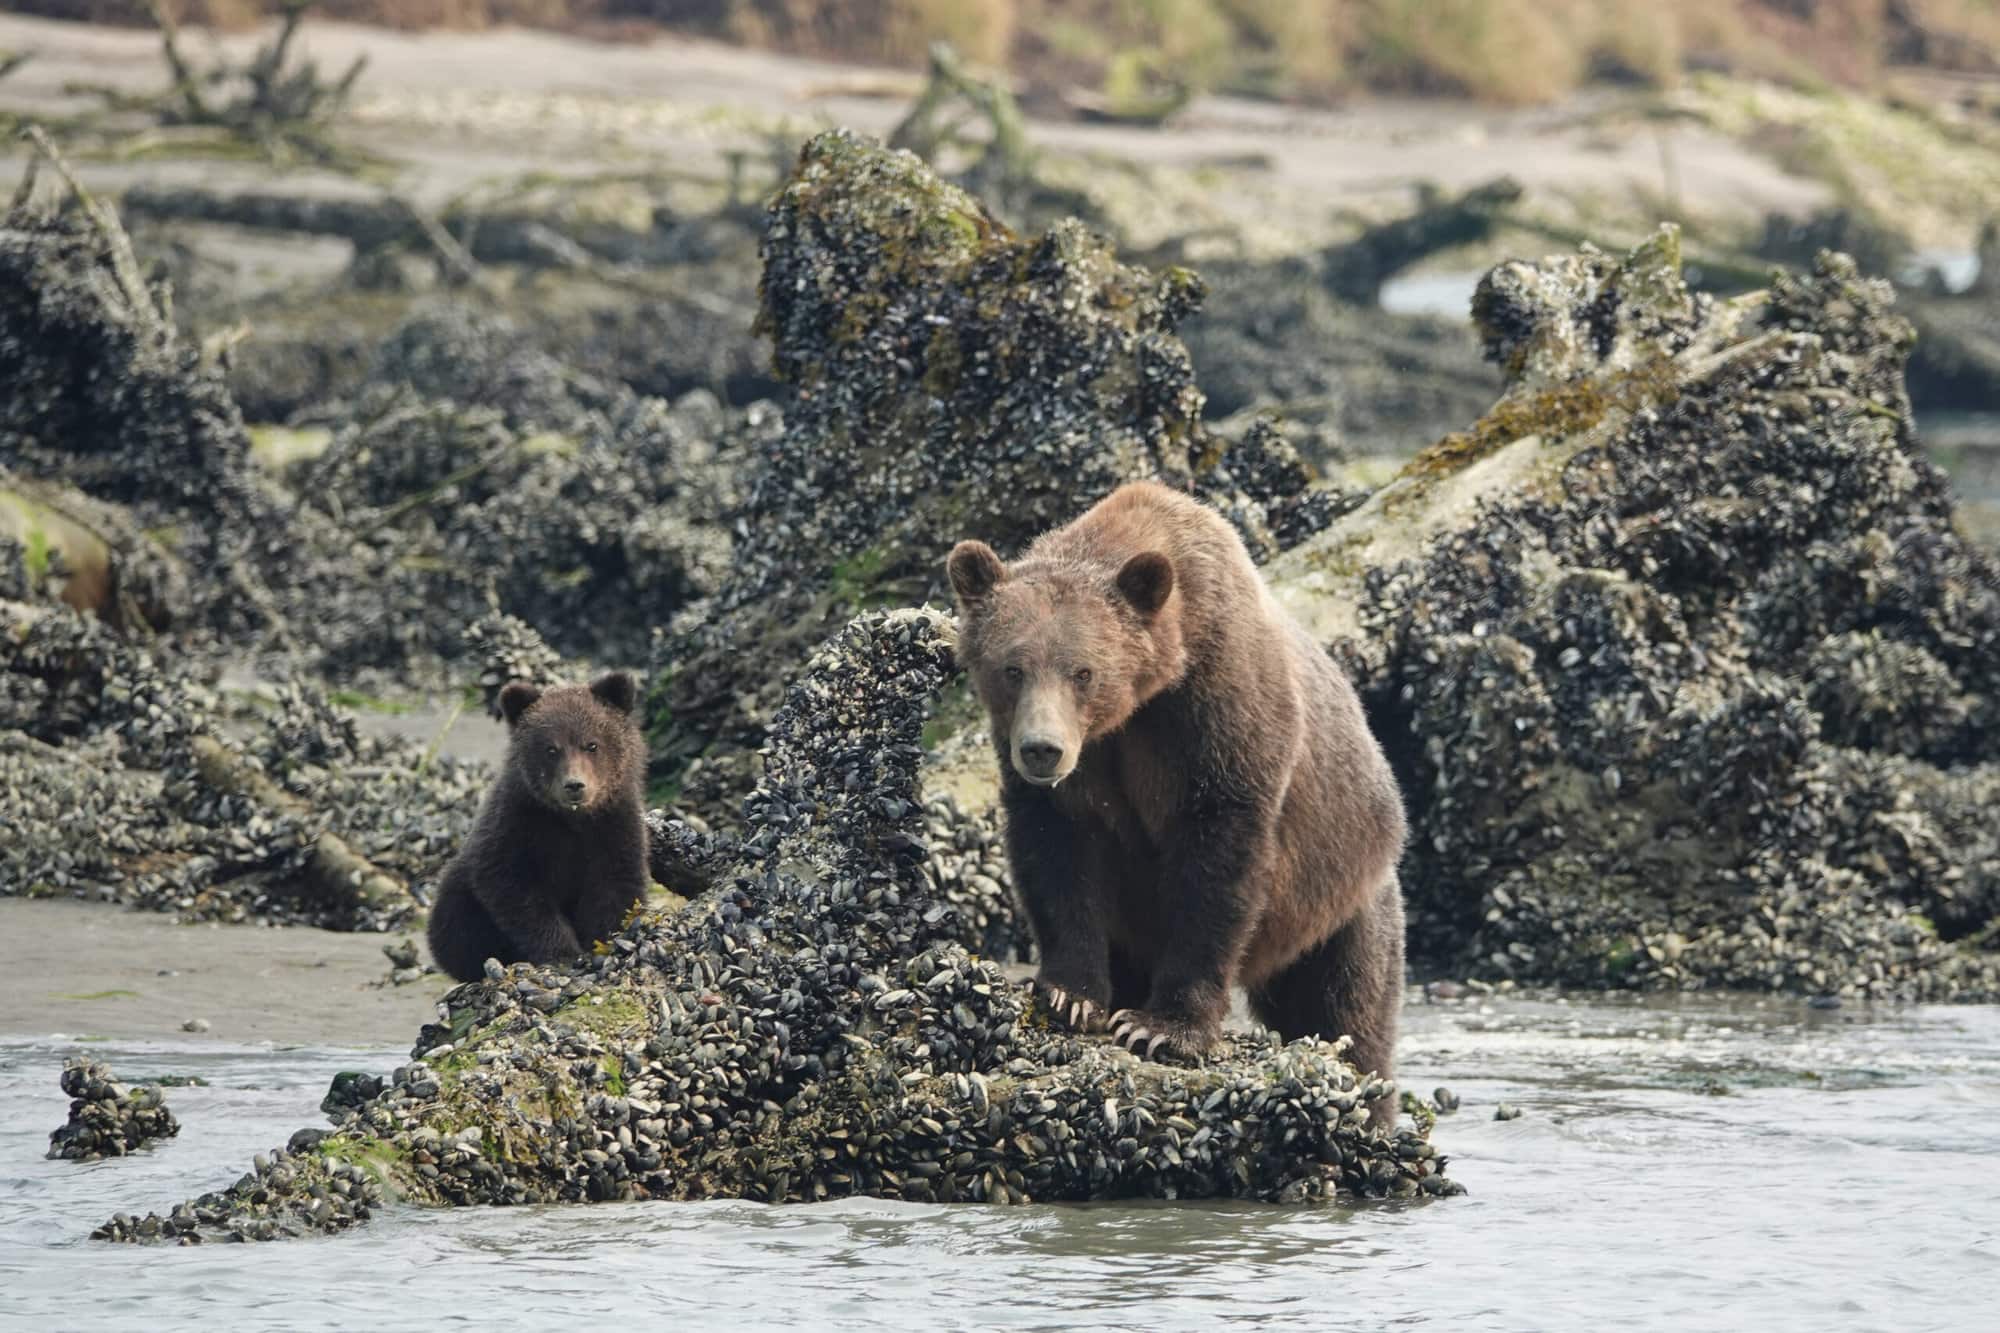 Sow and cub Grizzly Bear standing on rock